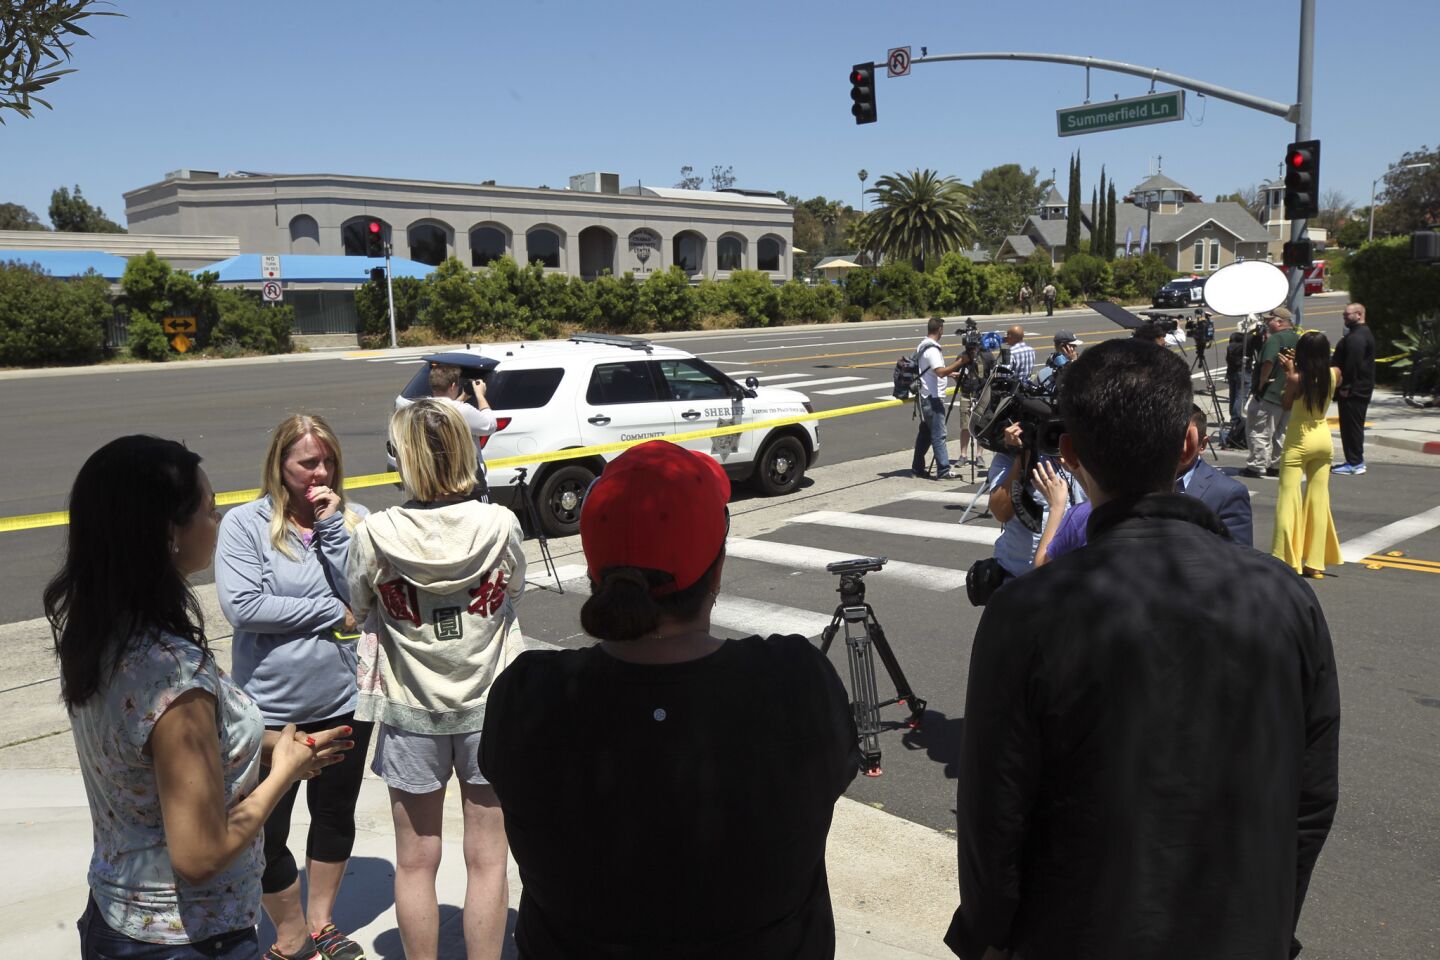 Members of the media and the surrounding community gather near the Altman Family Chabad Community Center in Poway after Saturday's shooting at Chabad of Poway synagogue.